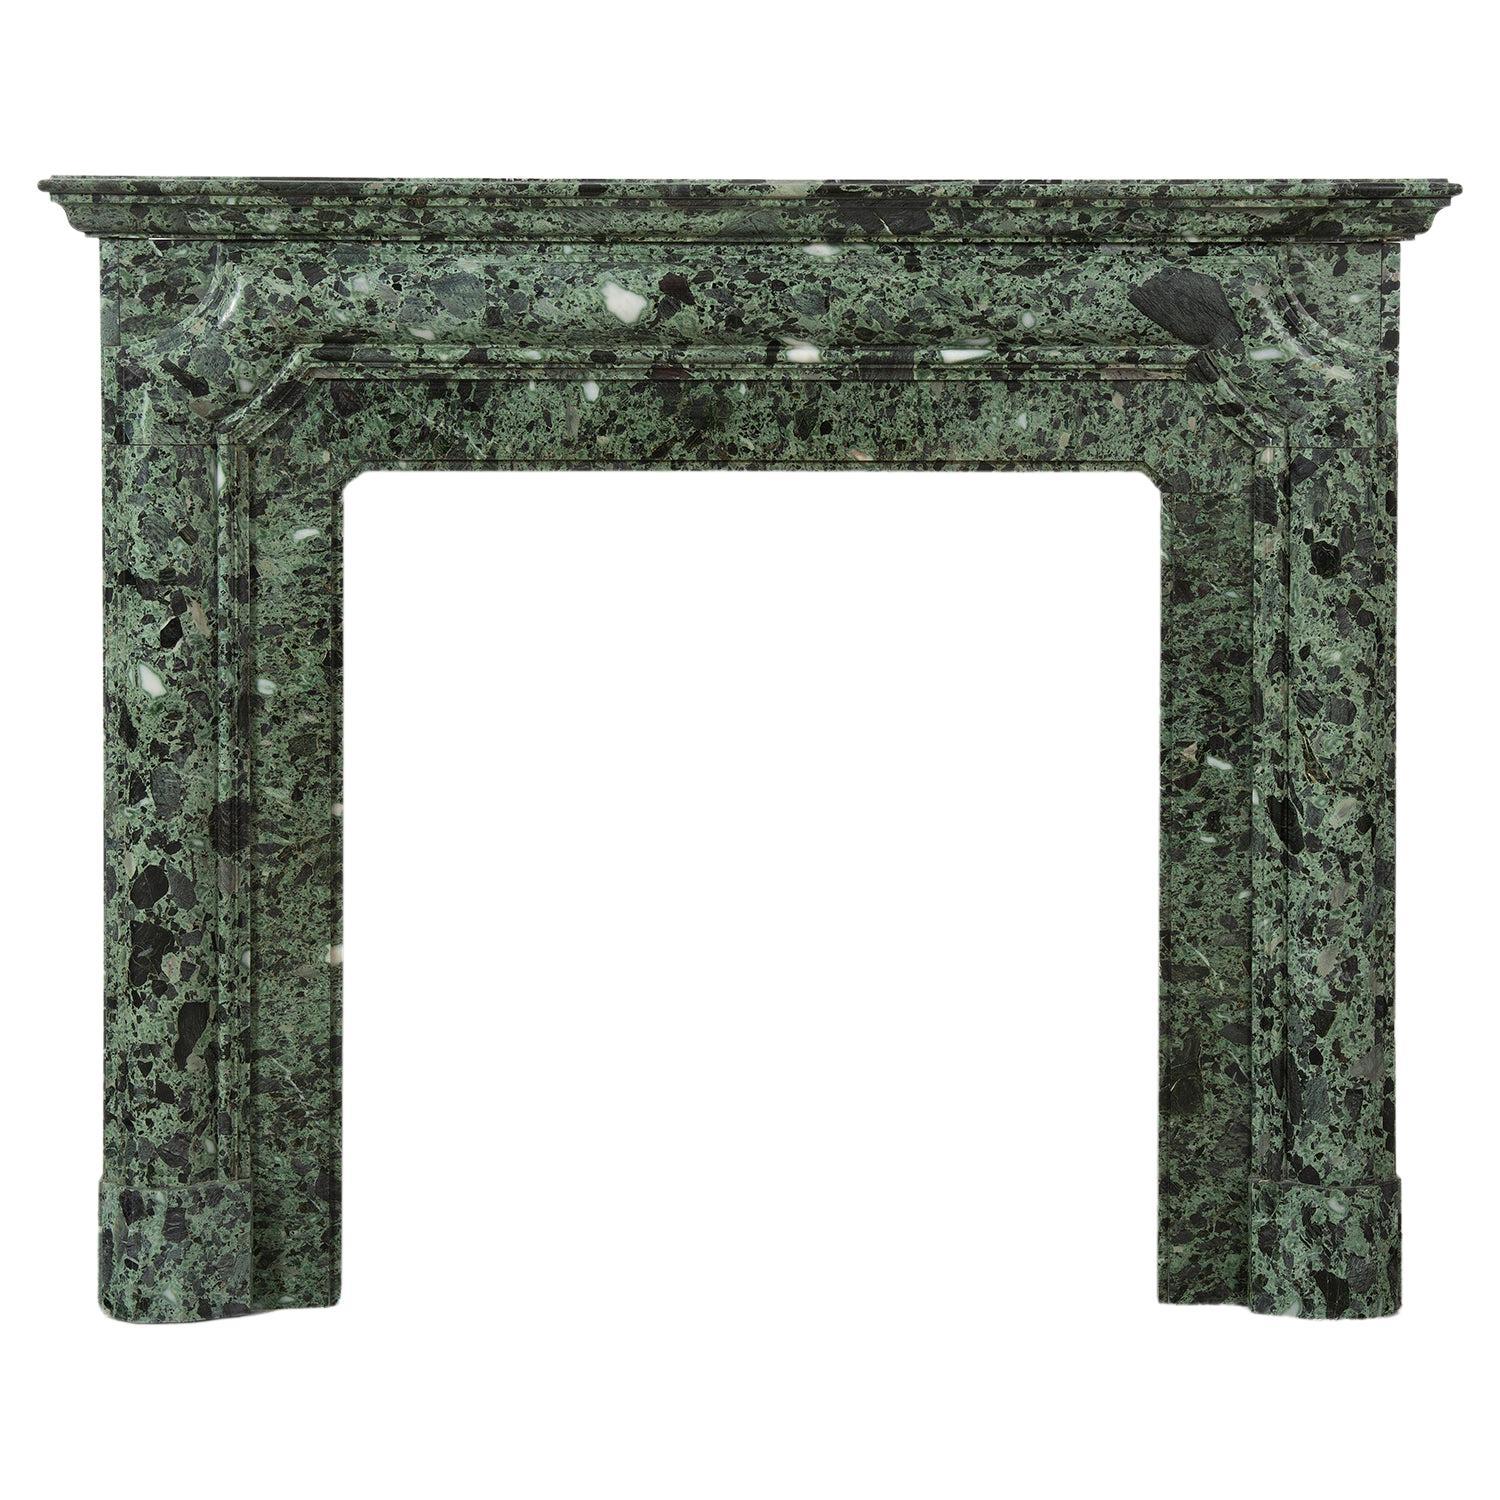 Suprising Green Breche Marble Fireplace Mantel